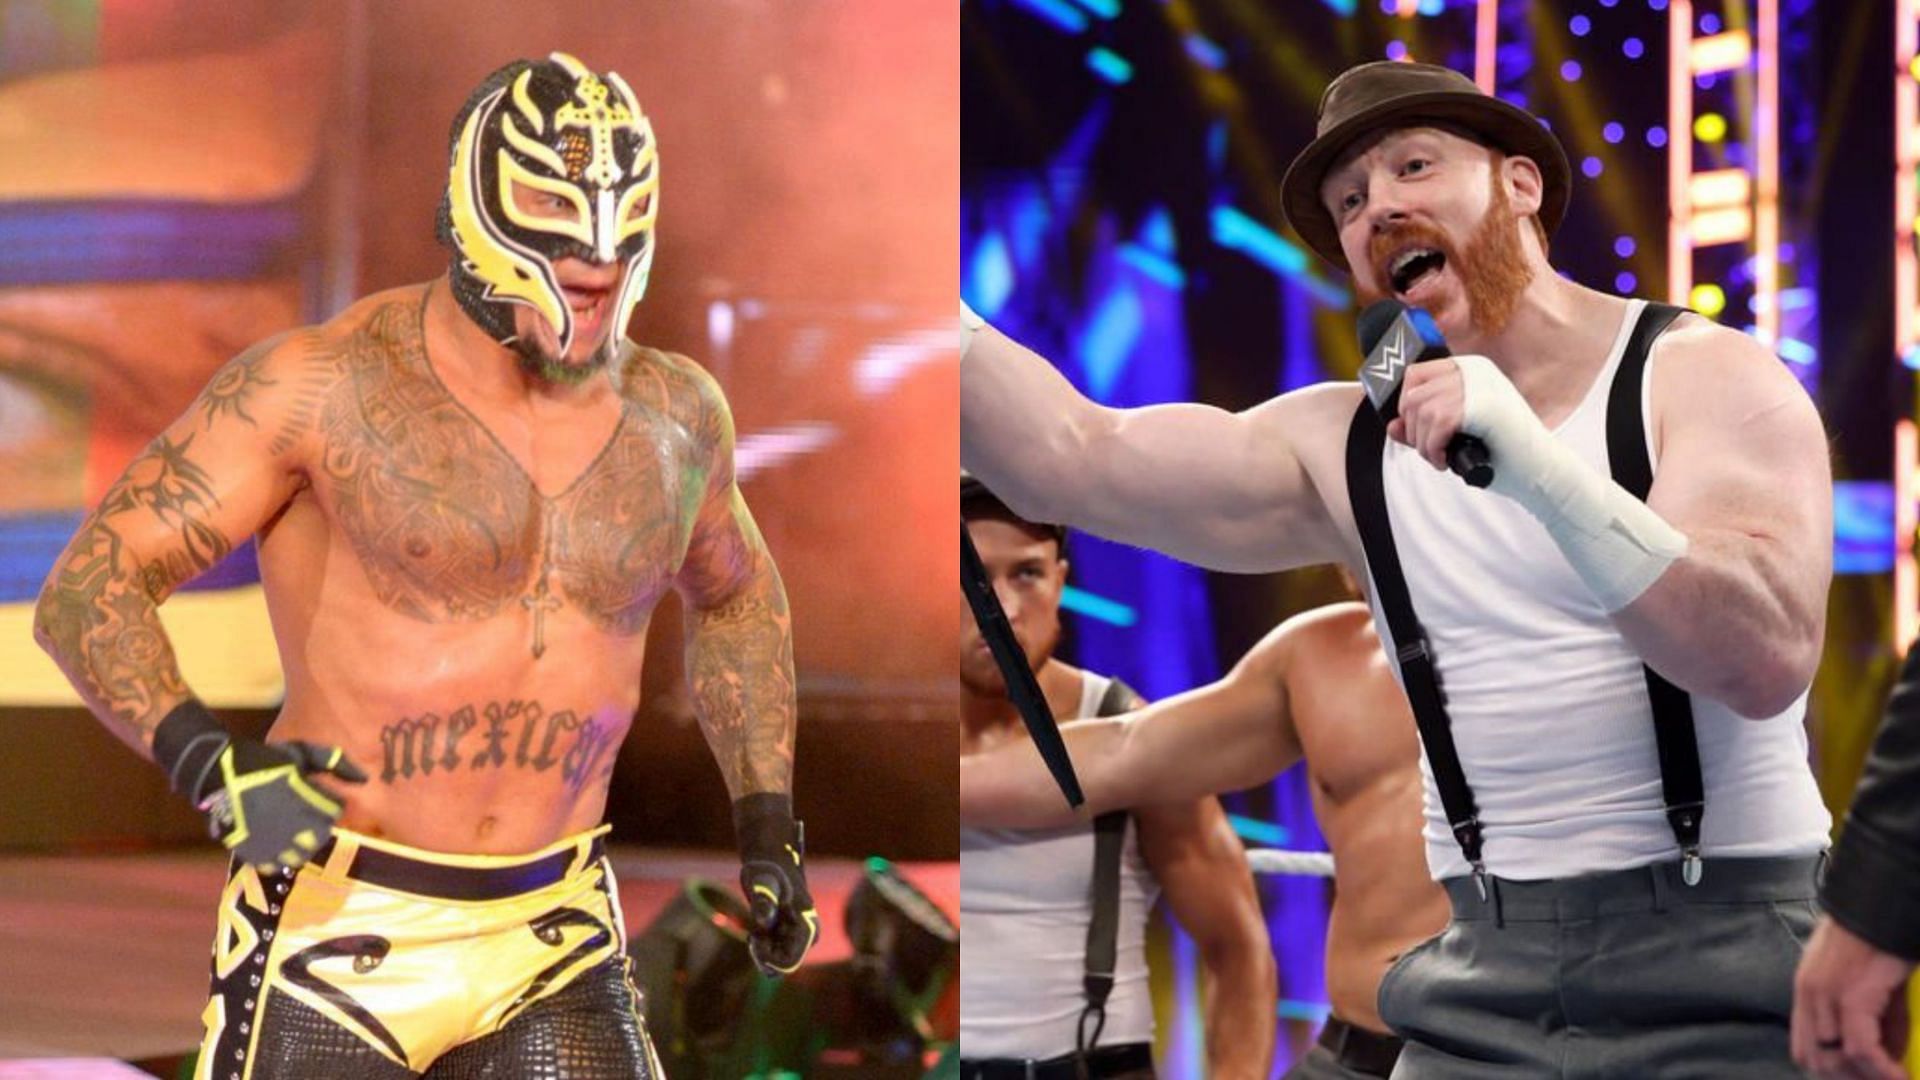 Rey Mysterio (left) and Sheamus (right)